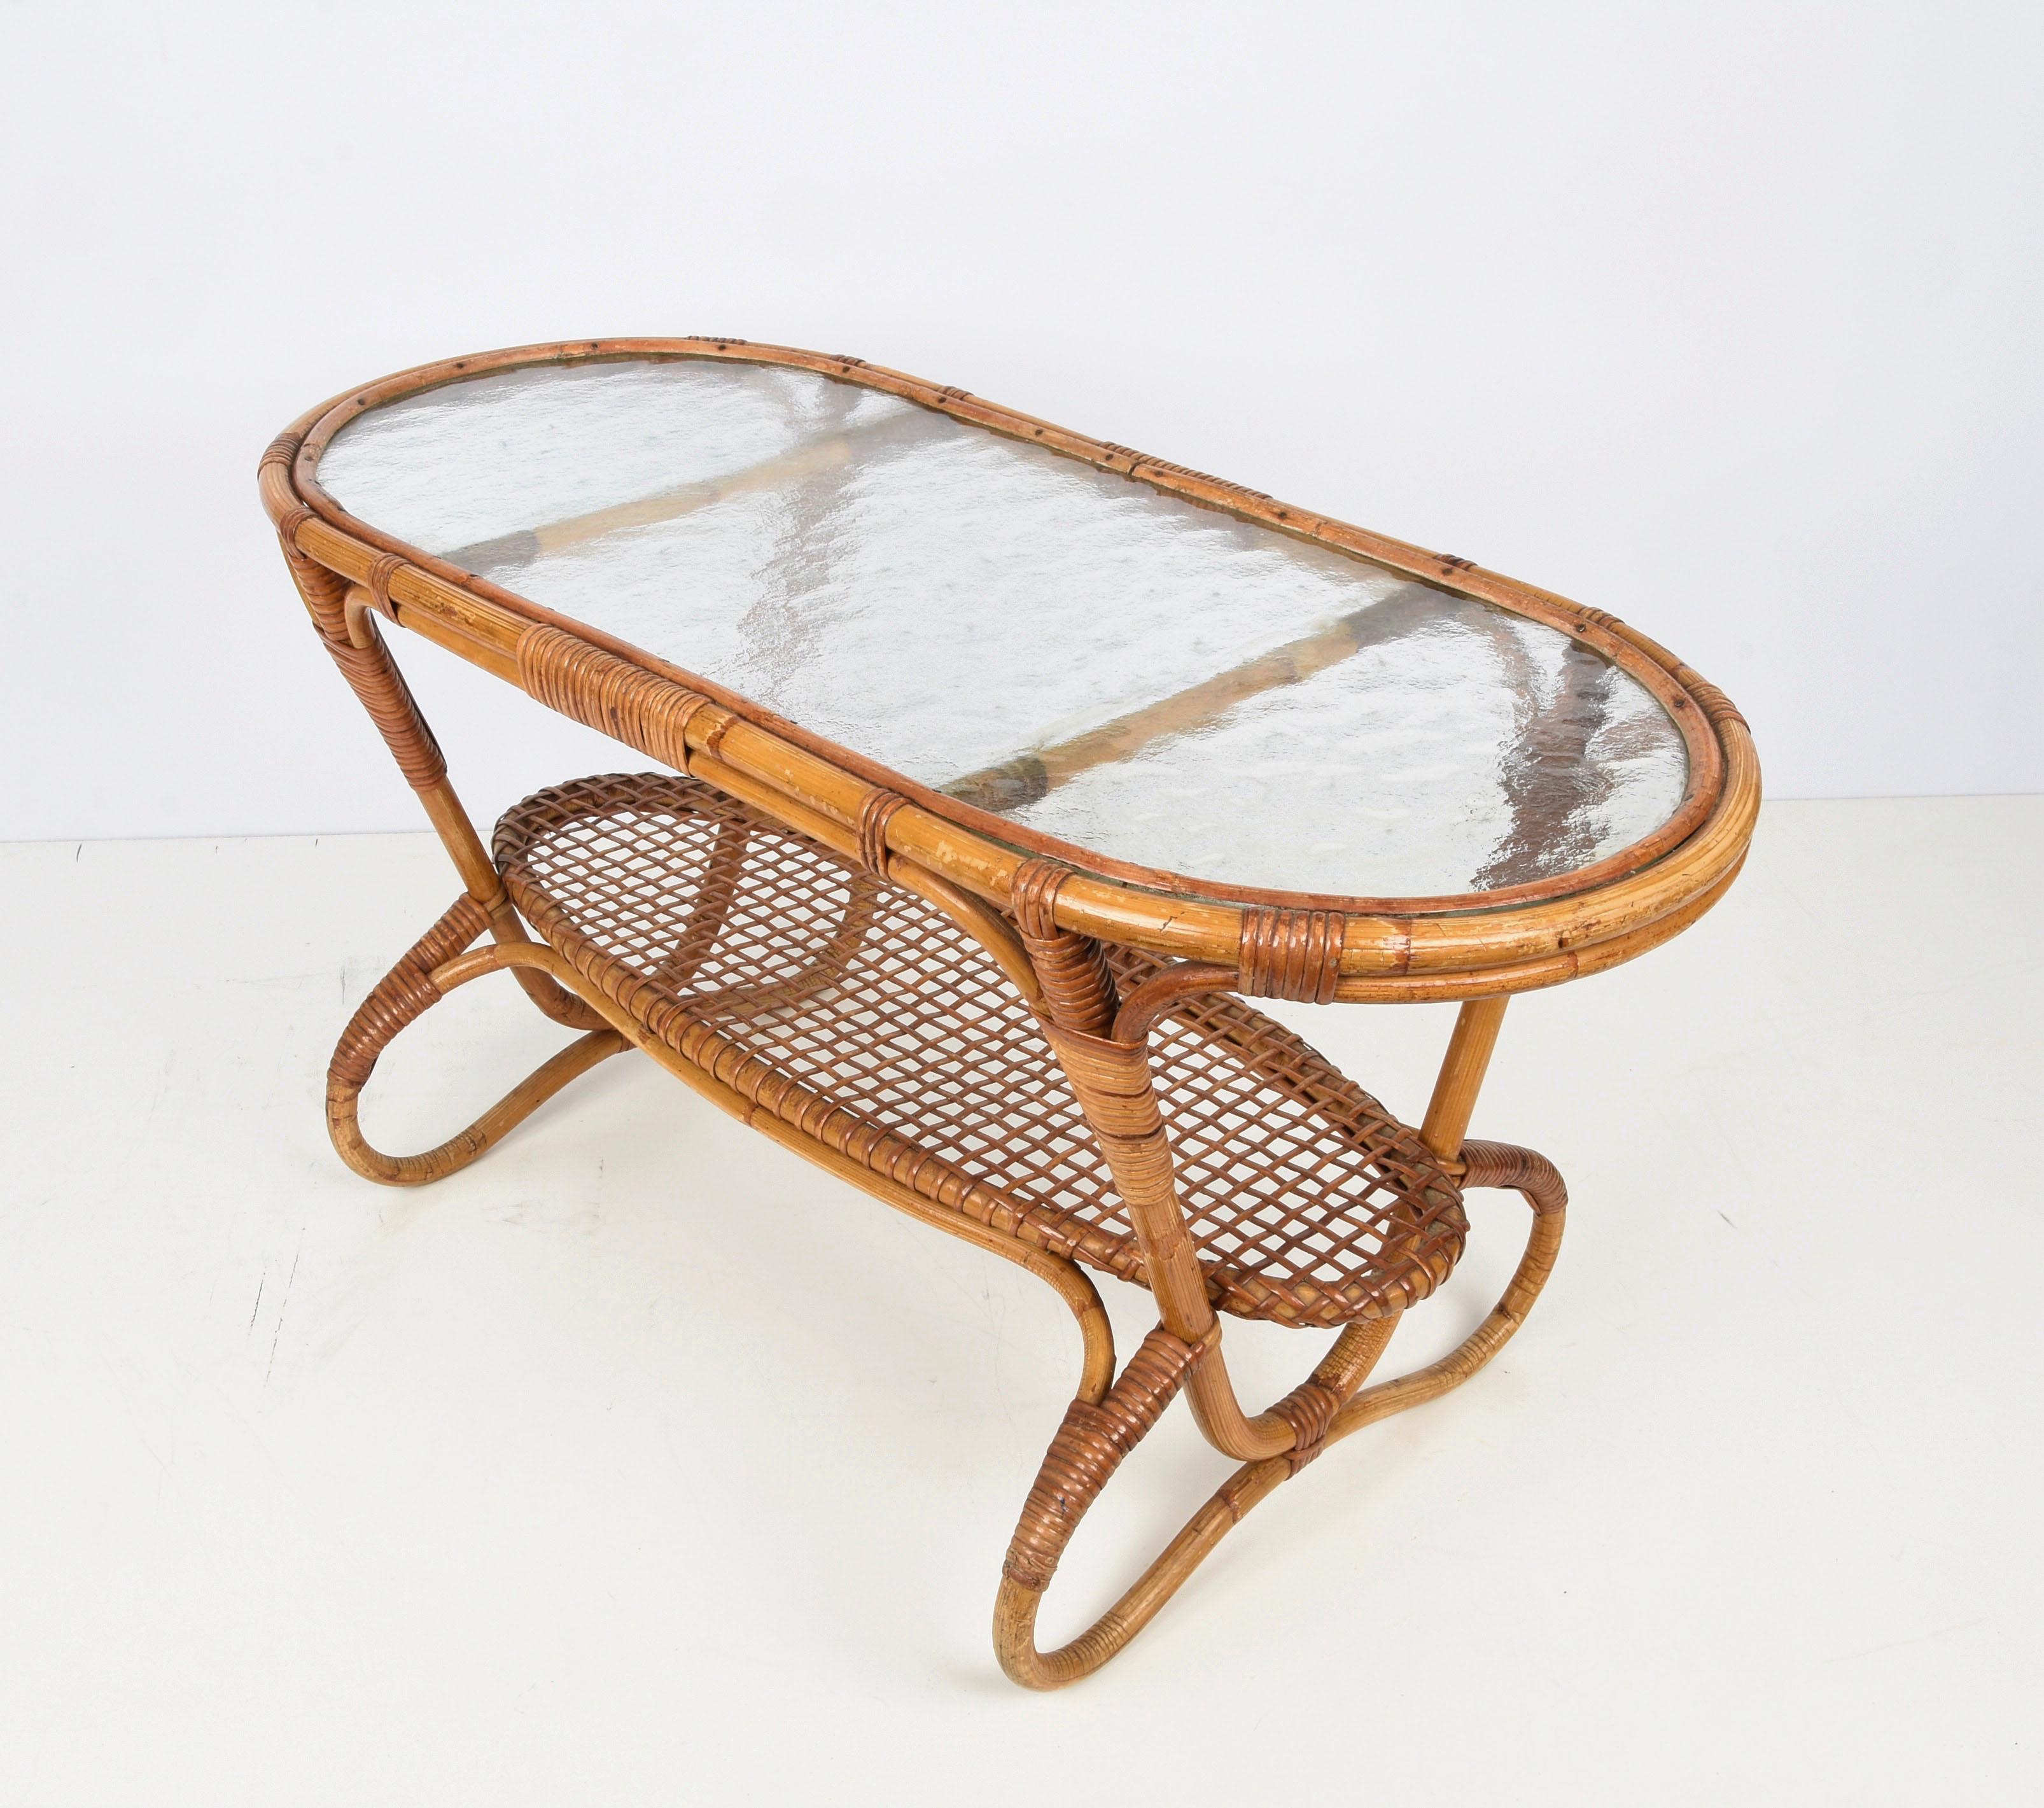 Midcentury Oval Rattan and Bamboo Dutch Coffee Table with Glass Top, 1950s For Sale 6